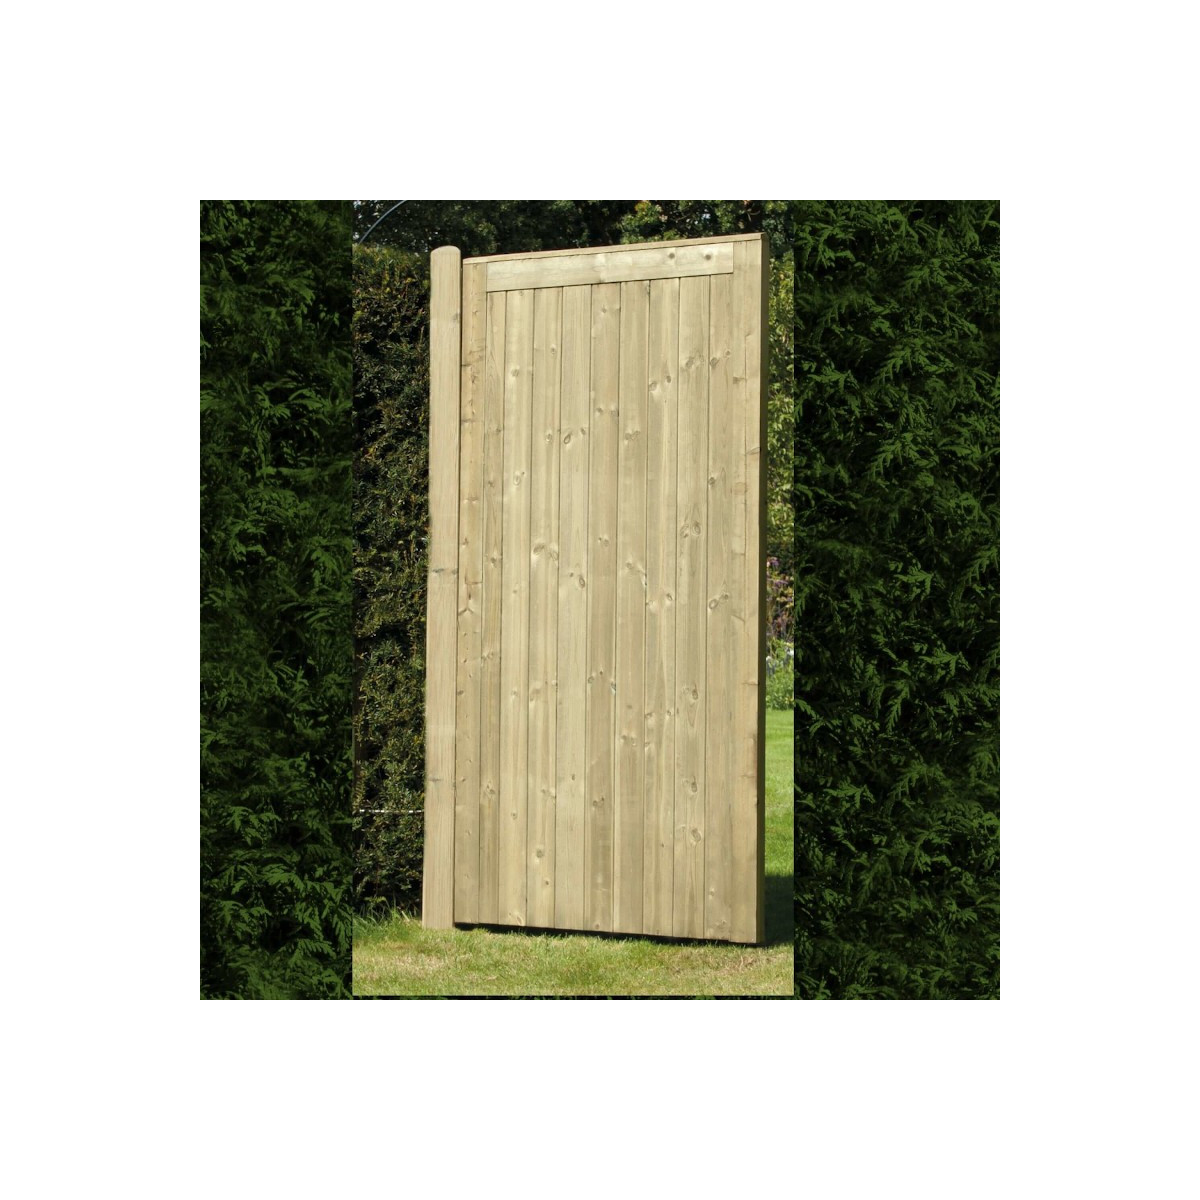 Elite Treated Softwood Tongue and Groove Framed, Ledged and Braced Pedestrian Gate - Front View